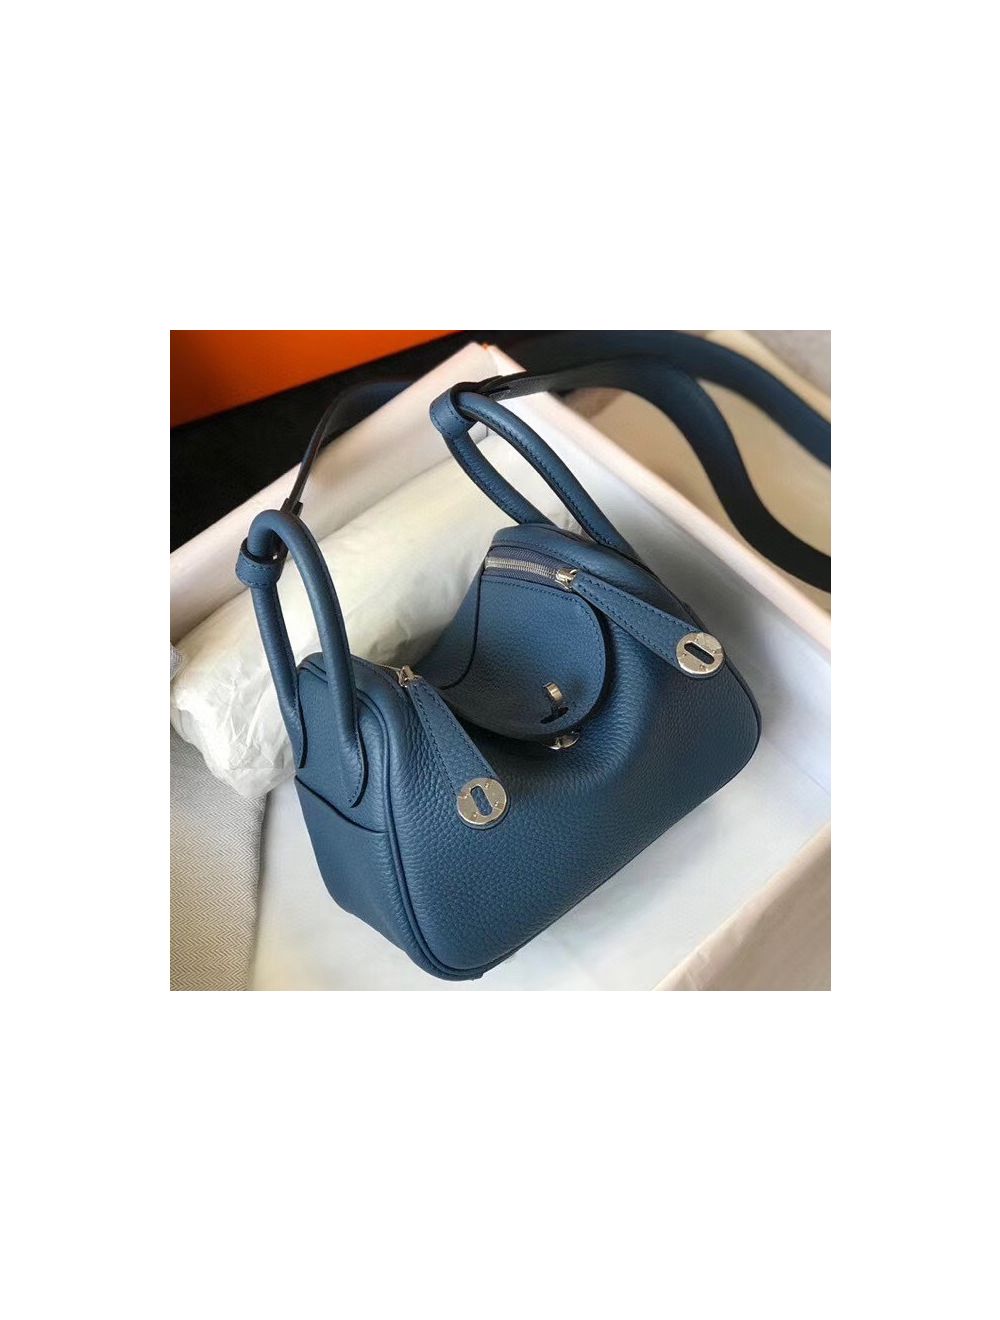 Replica Hermes Mini Lindy Bag In Blue Agate Clemence Leather